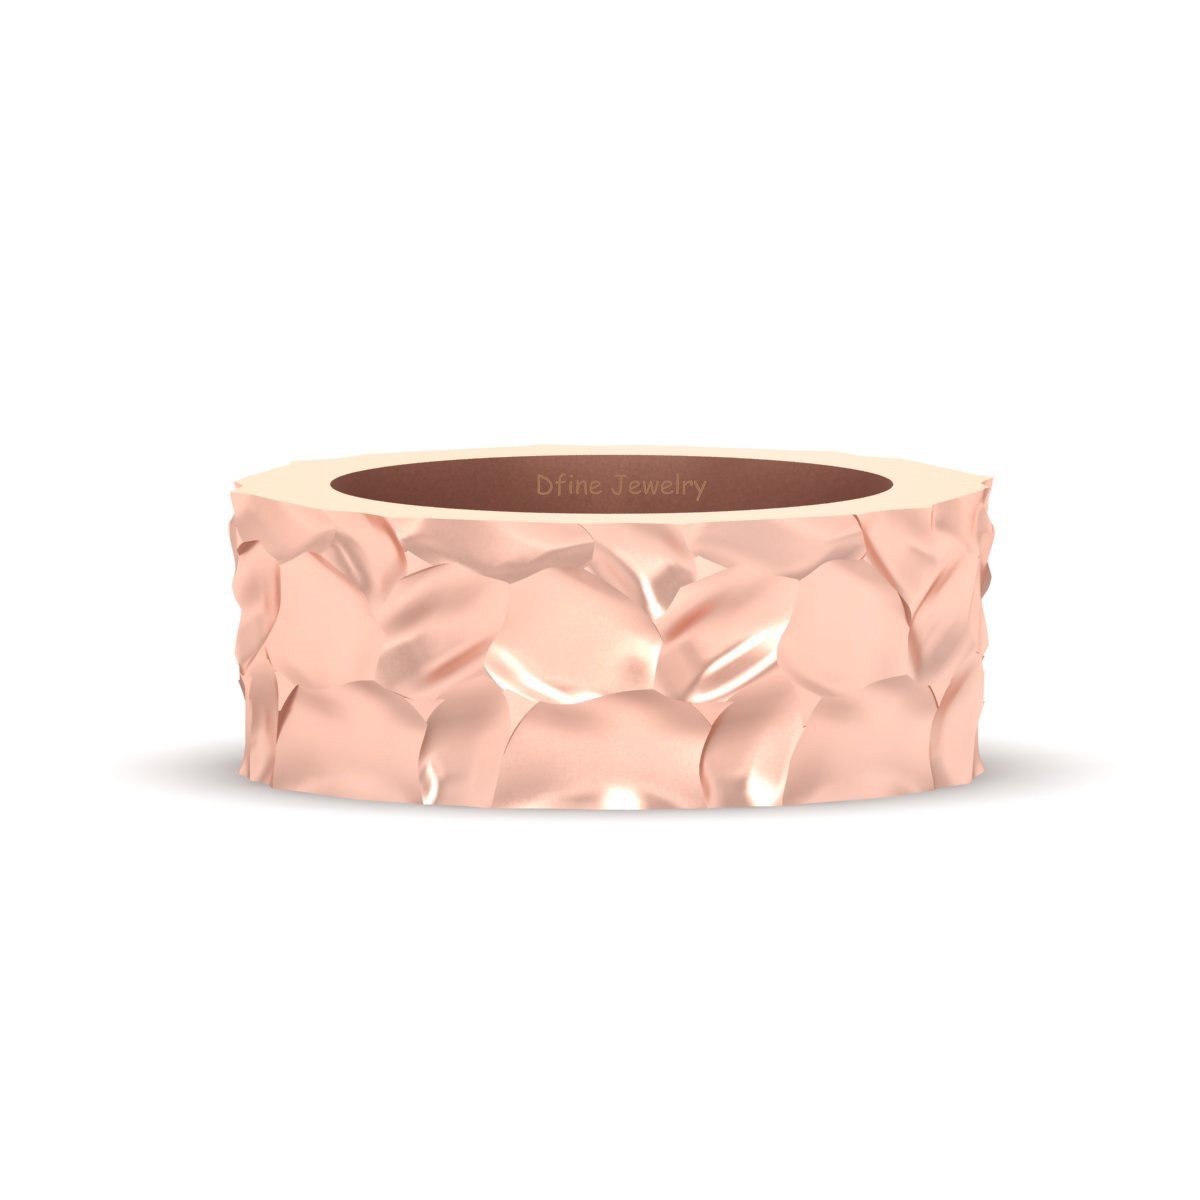 crumpled design textured band hammered finish rose gold fn 925 sterling silver